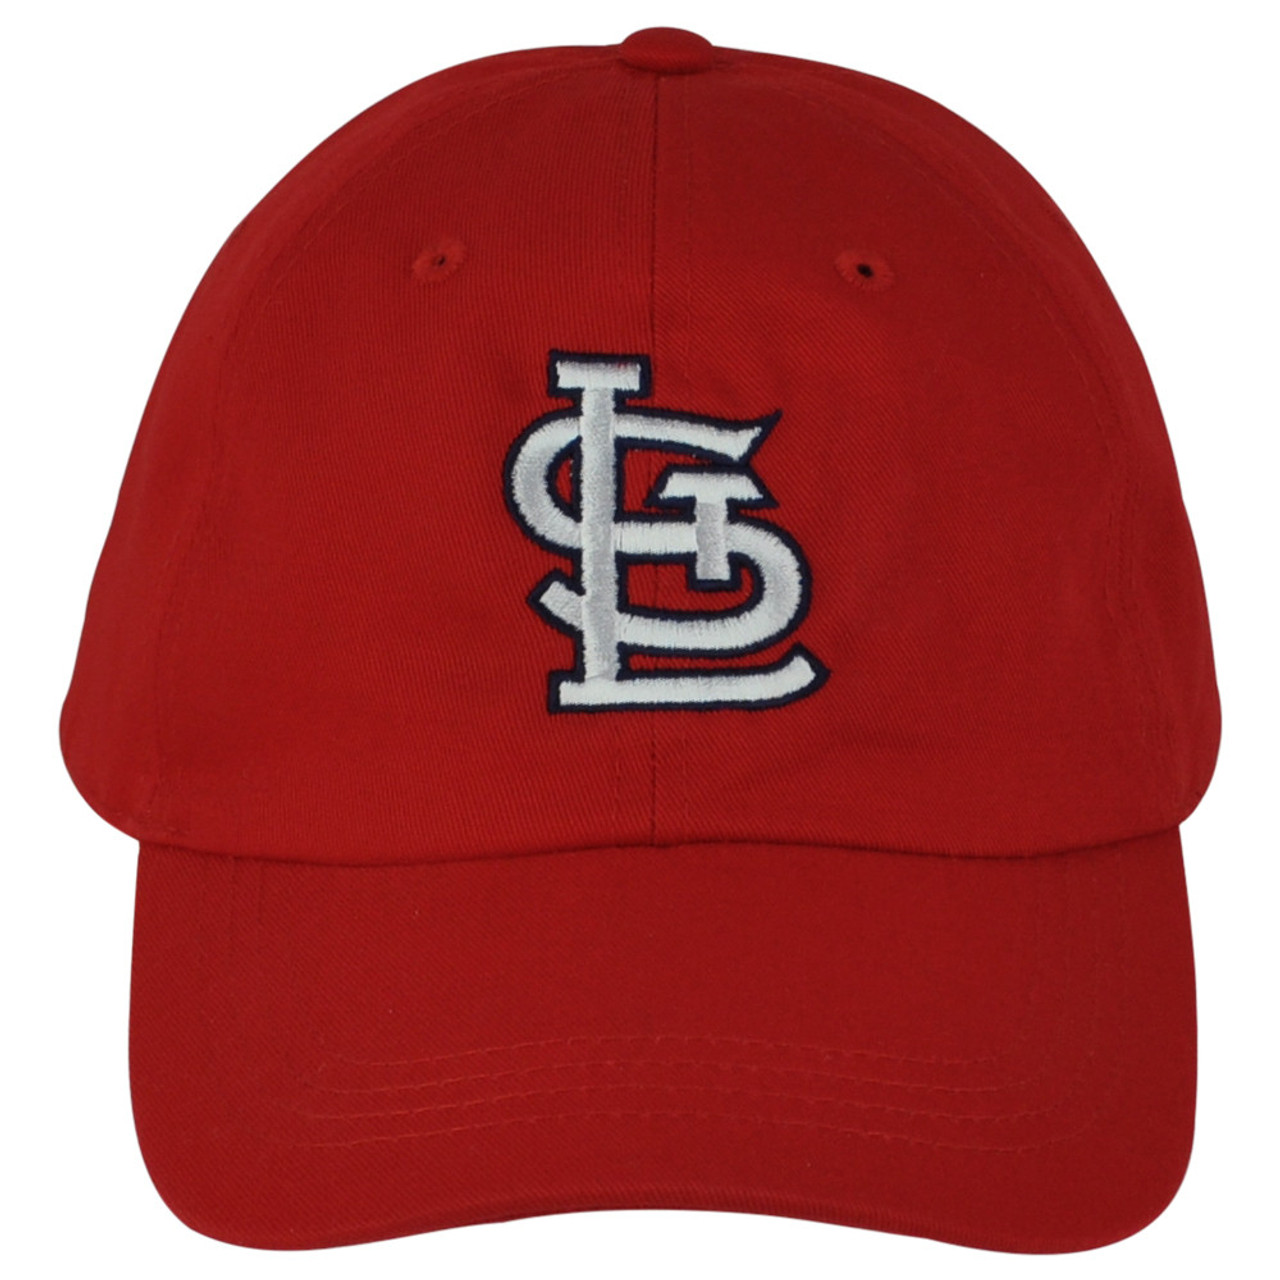 New Cardinals hat features toasted ravioli Gateway Arch